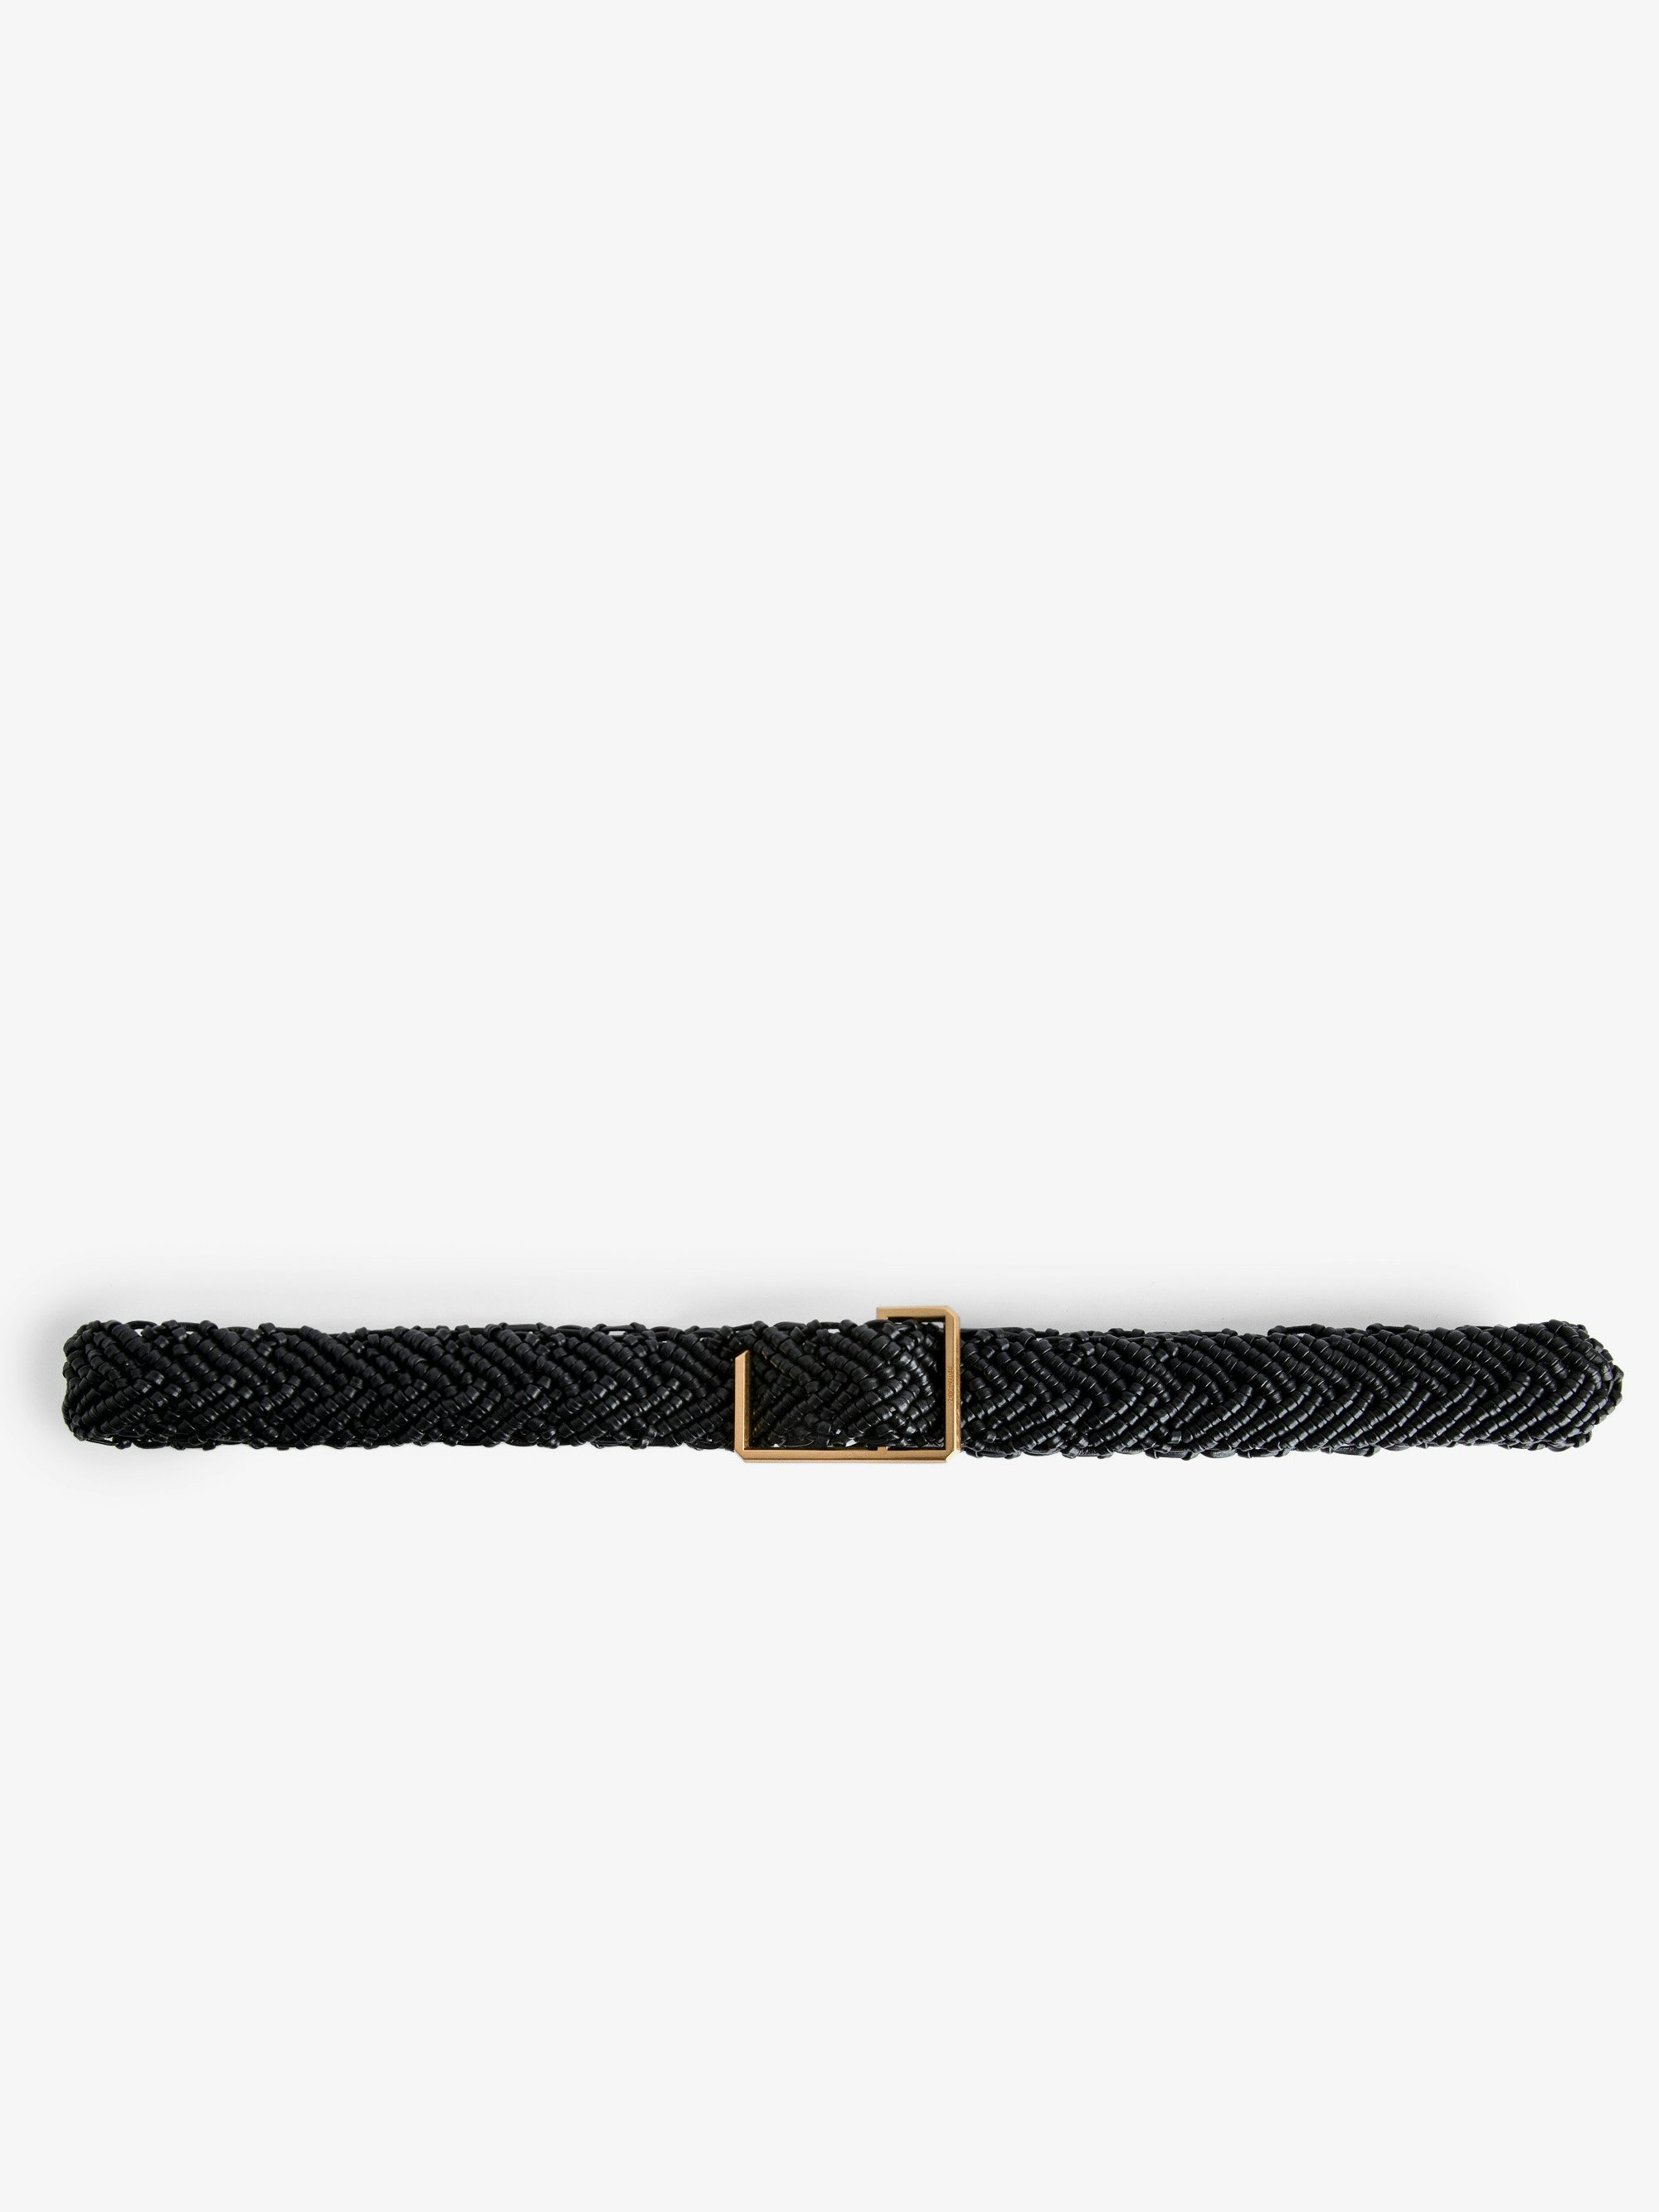 La Cecilia Obsession Belt - Adjustable black grained and braided leather belt with C buckle.